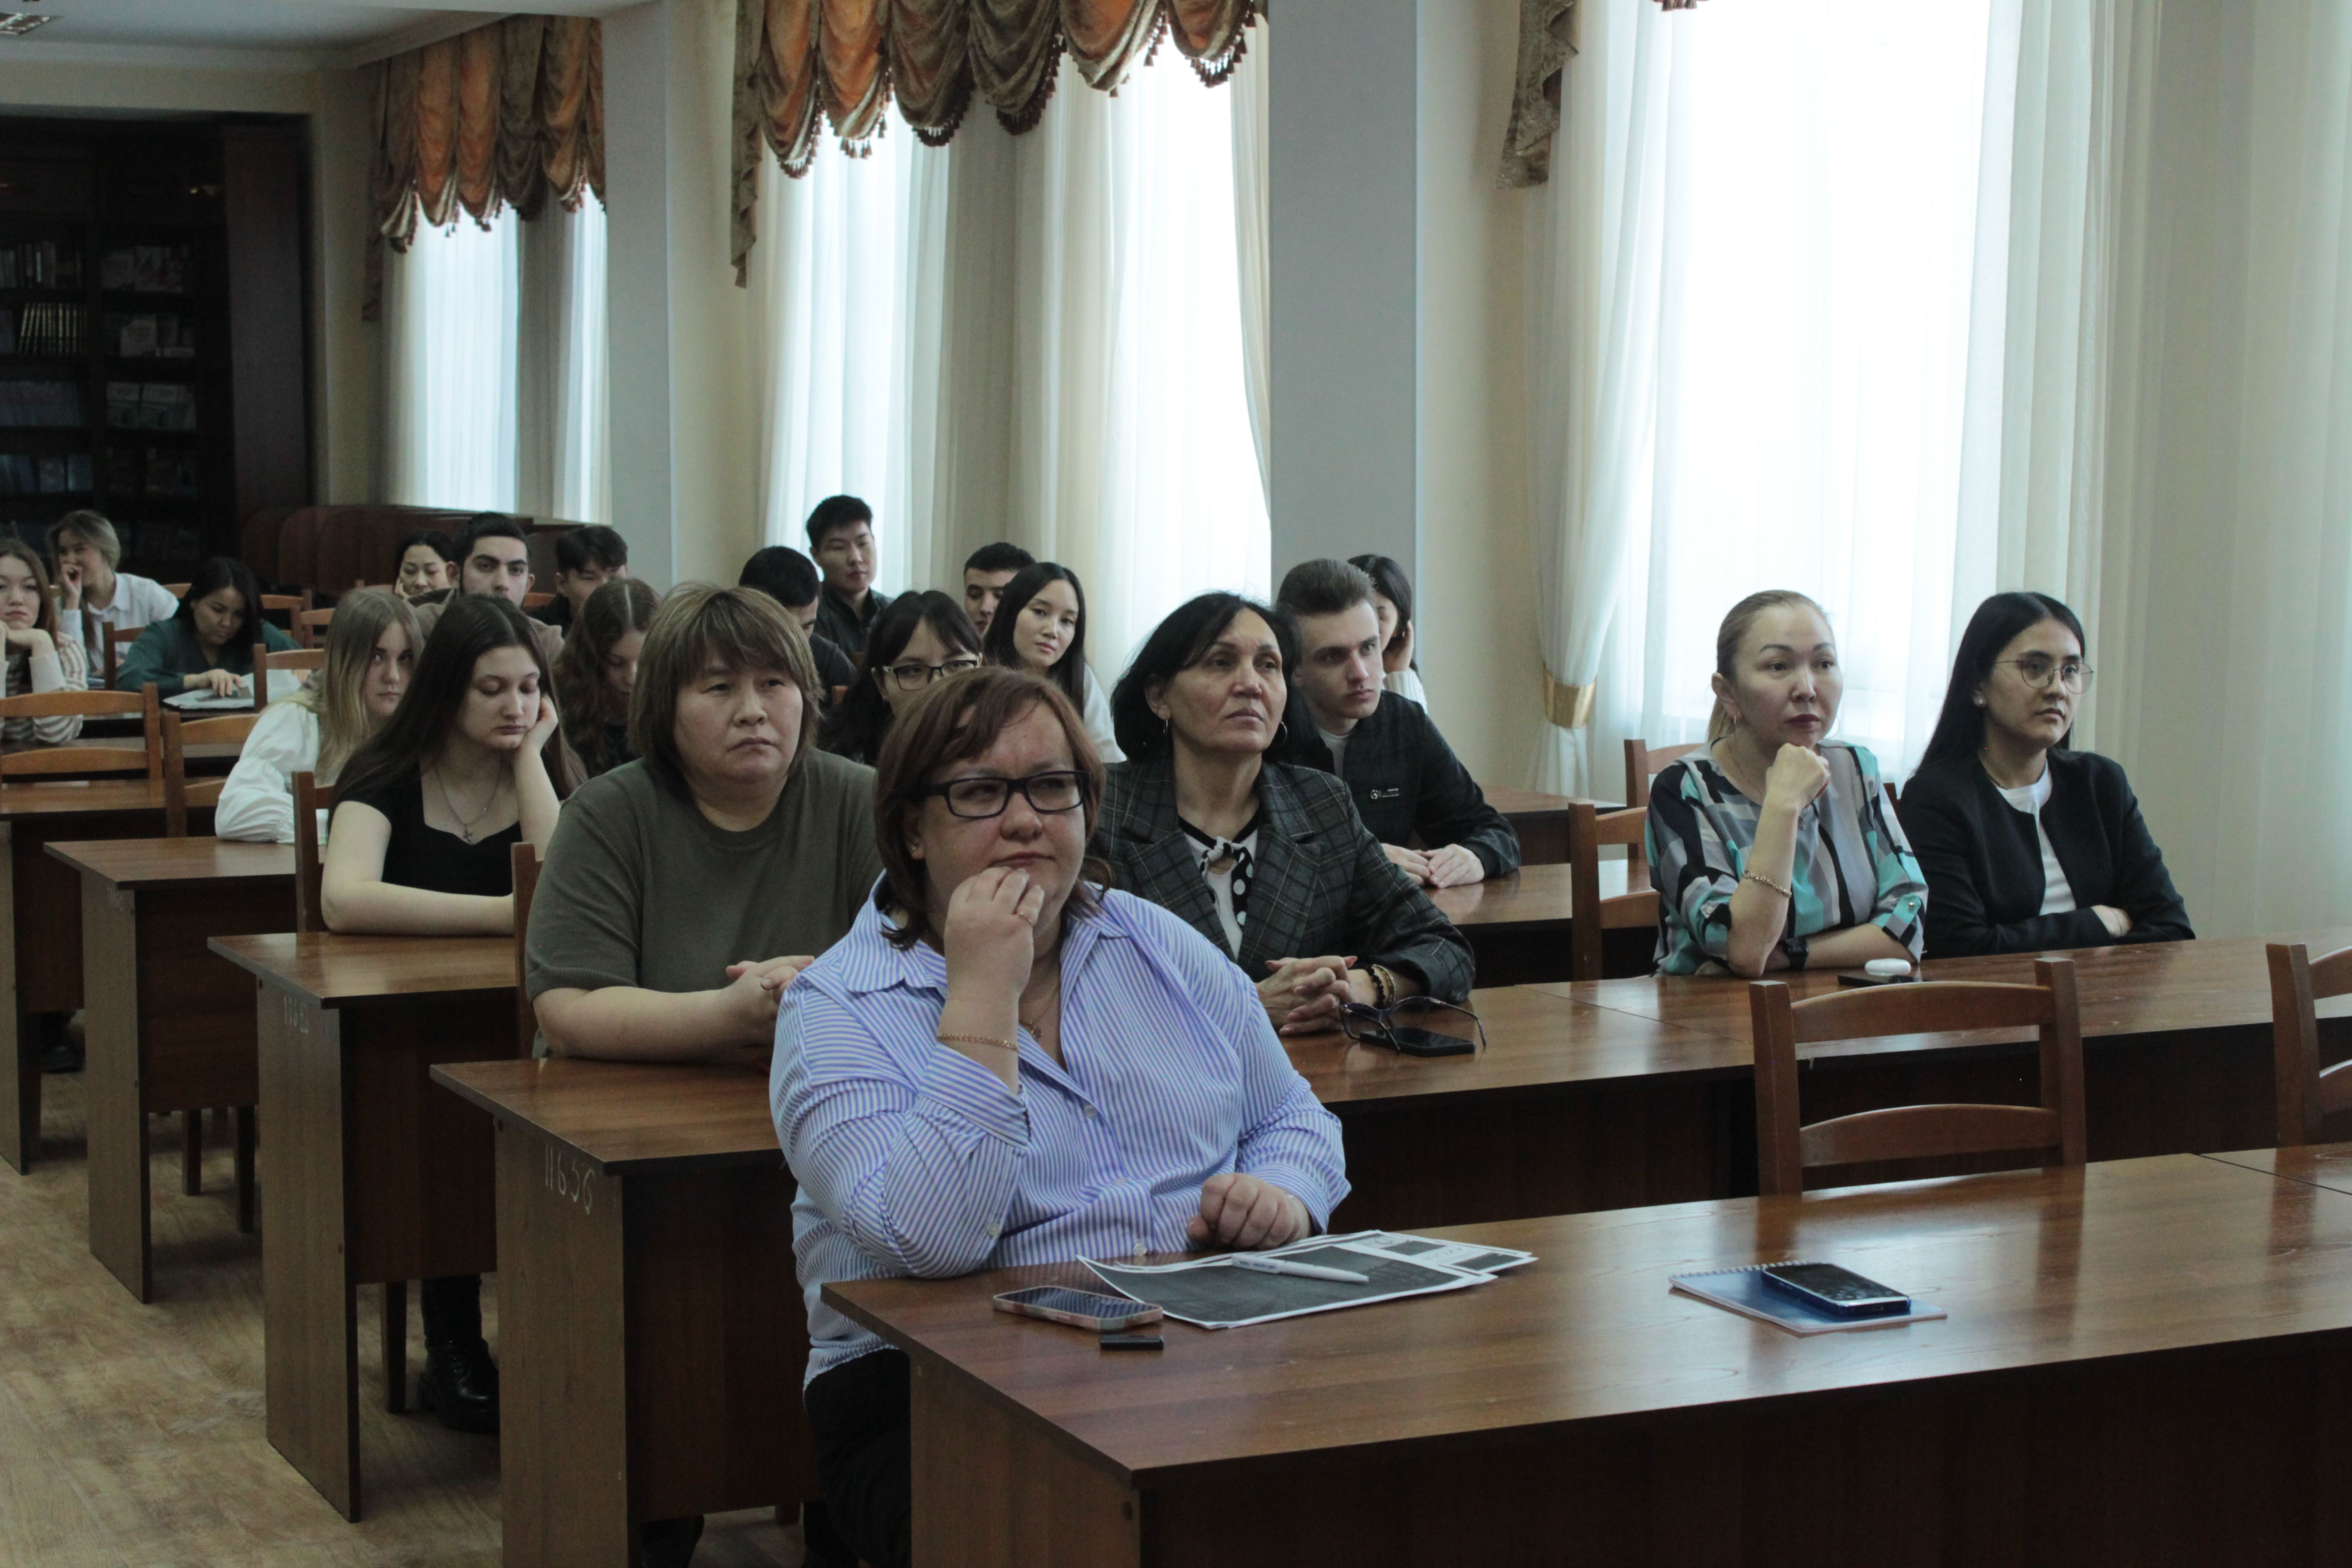 An open lecture on anti-corruption legislation was held